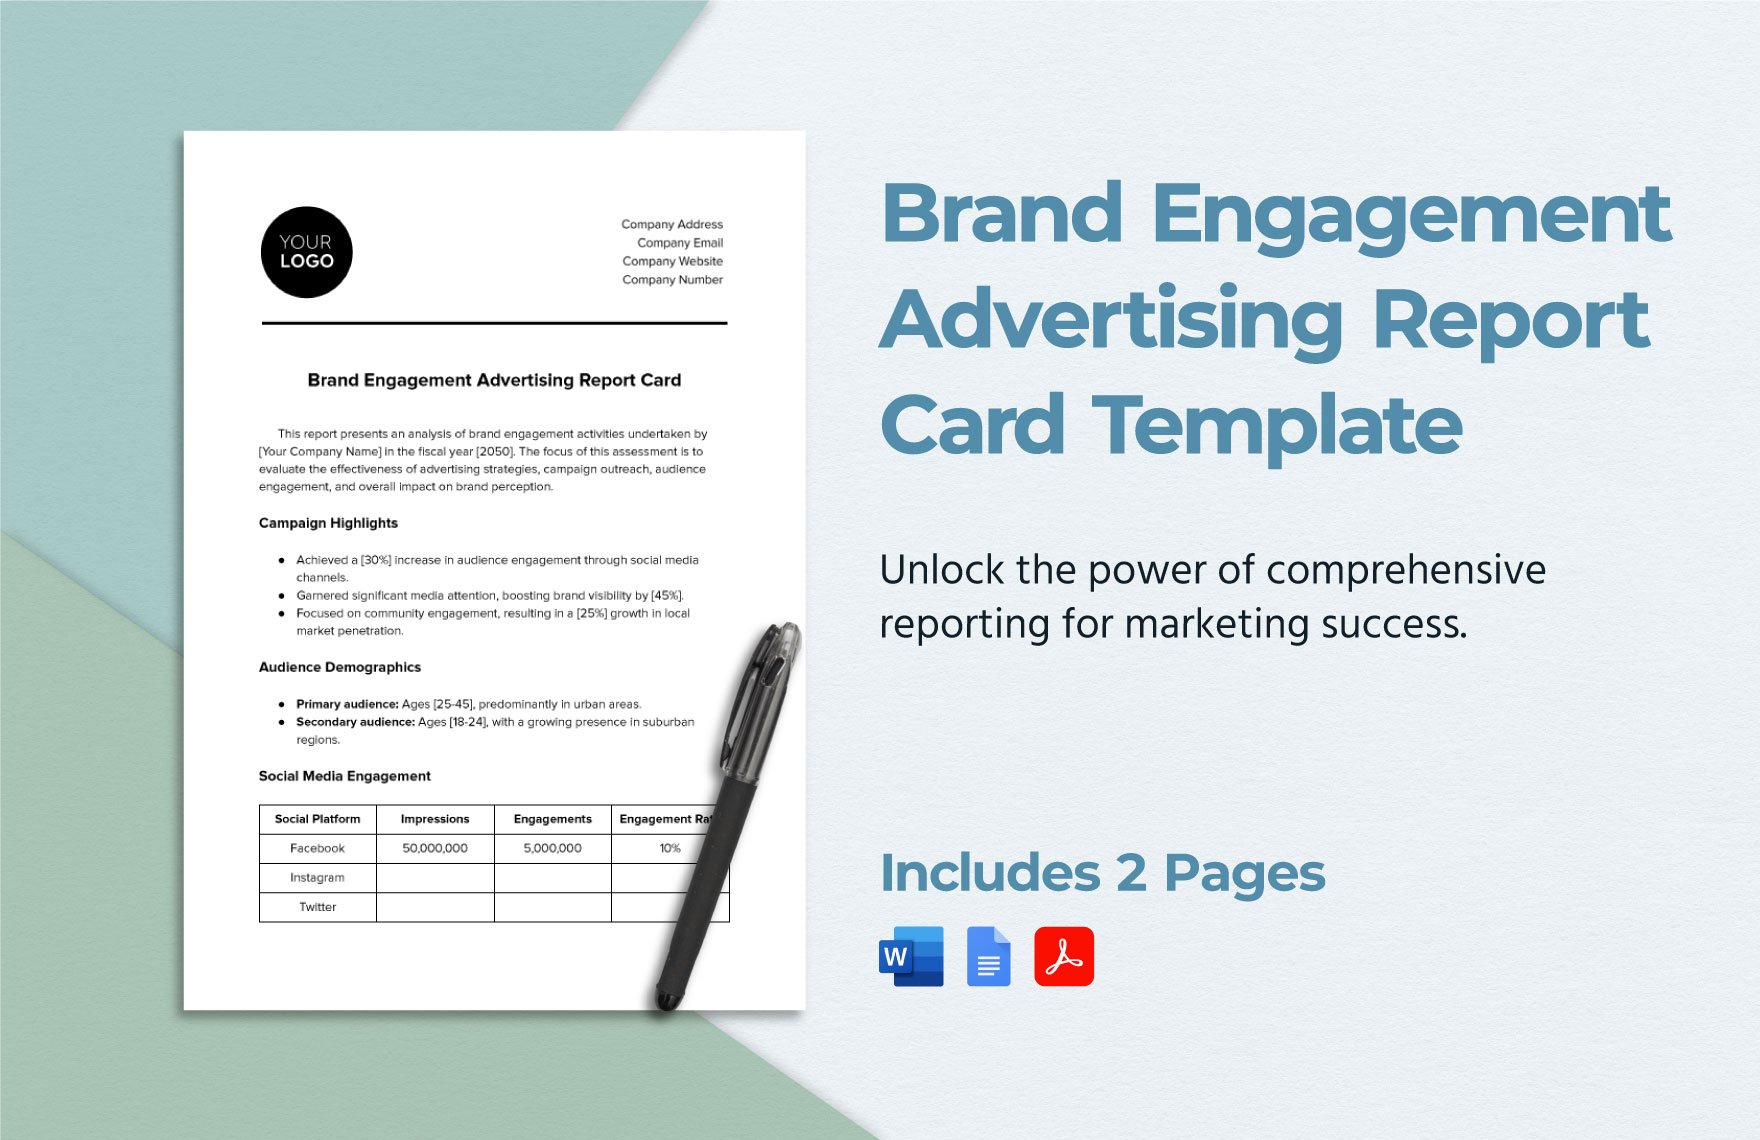 Brand Engagement Advertising Report Card Template in Word, Google Docs, PDF